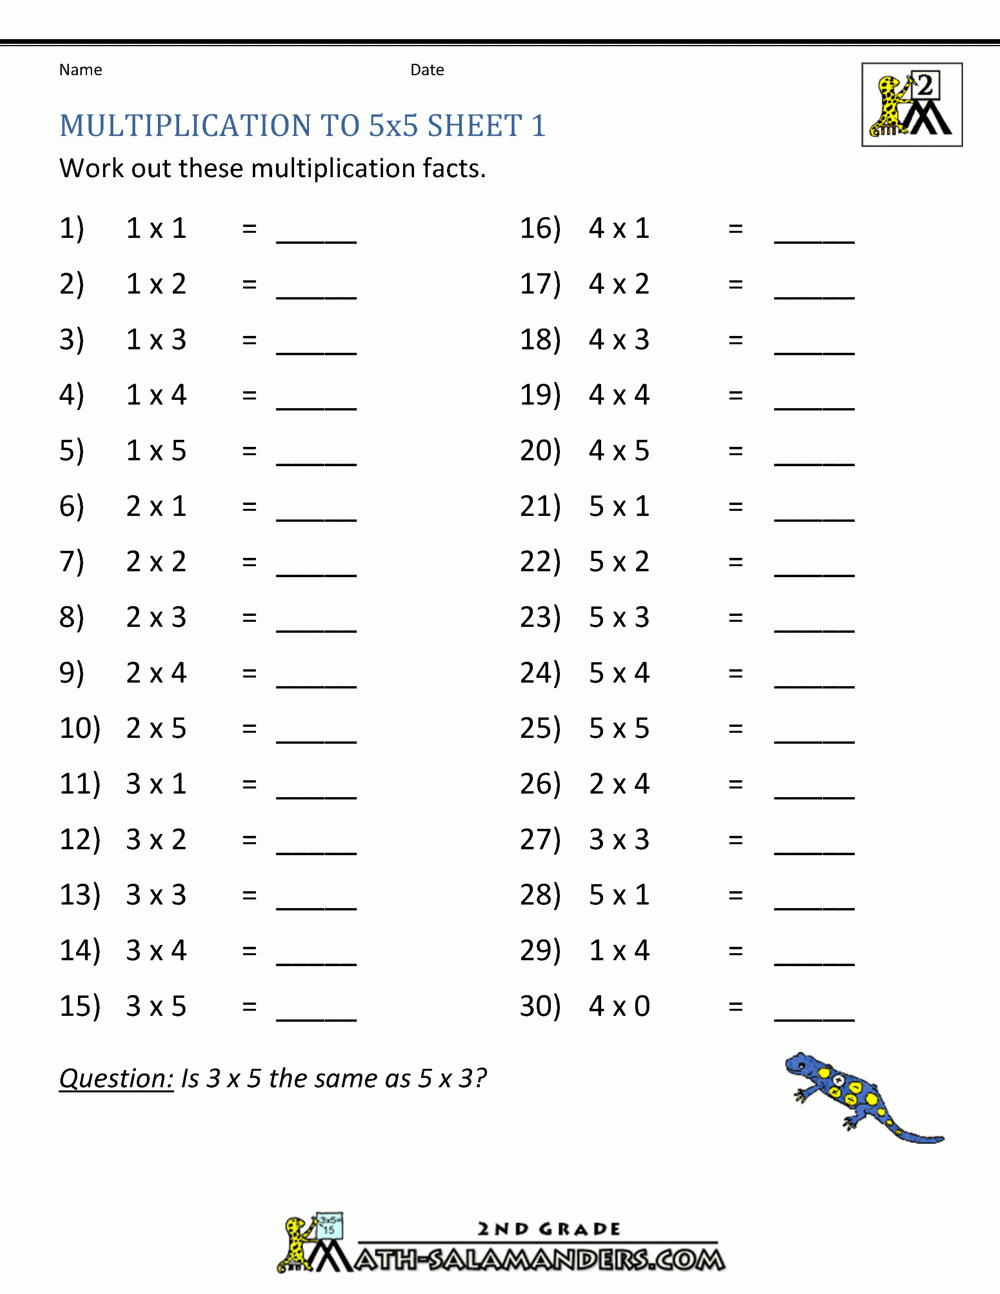 mixed-multiplication-table-times-tables-worksheets-free-printable